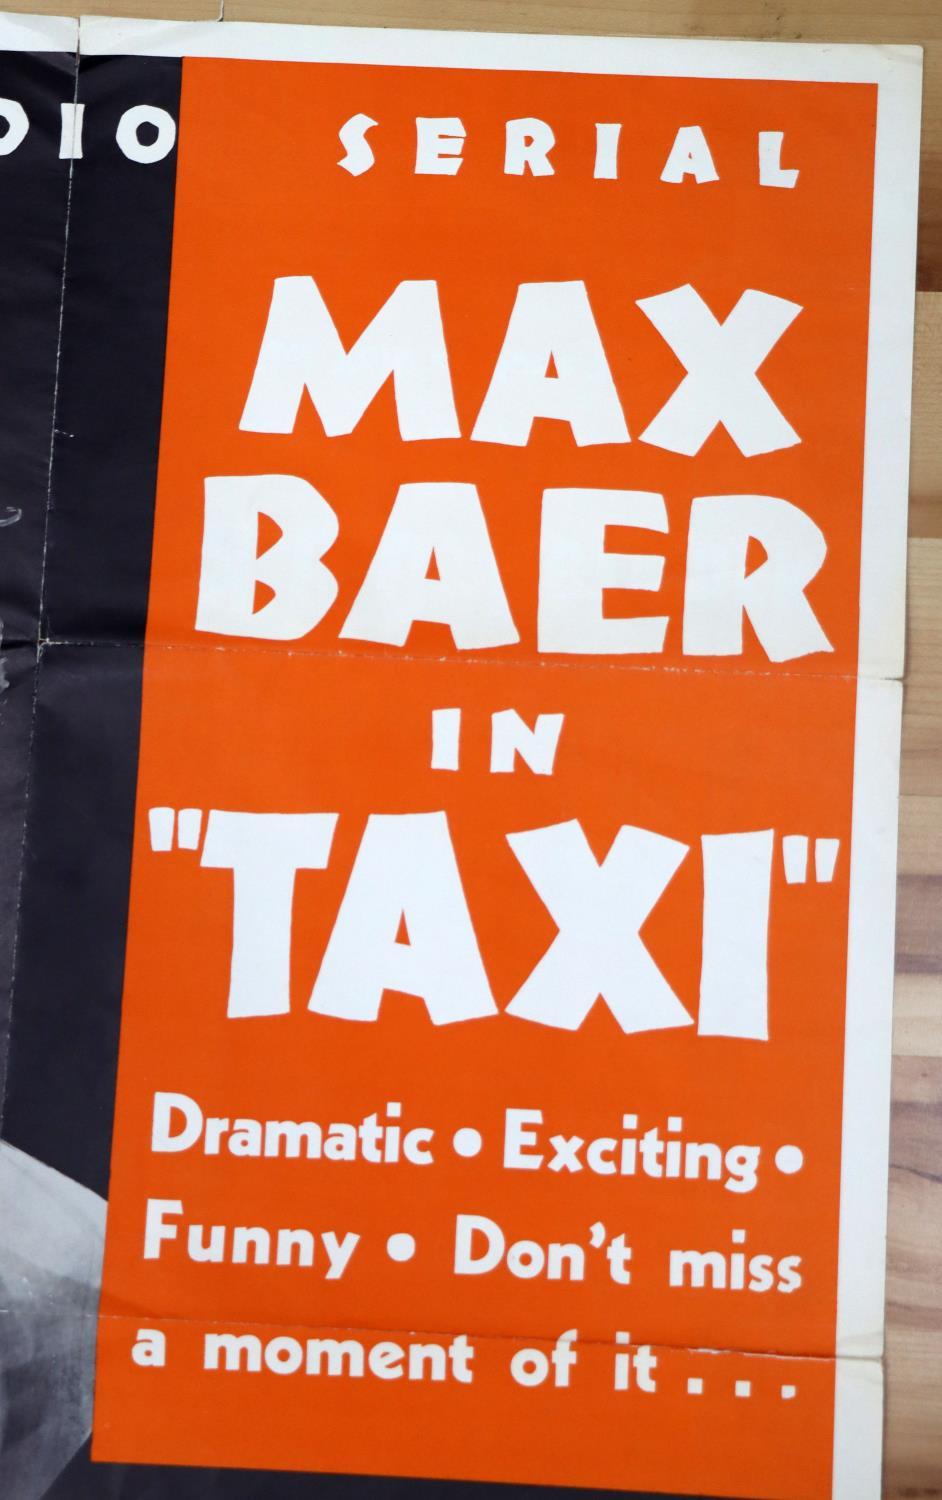 RARE MAX BAER 1930'S SERIAL TAXI POSTER LITHO